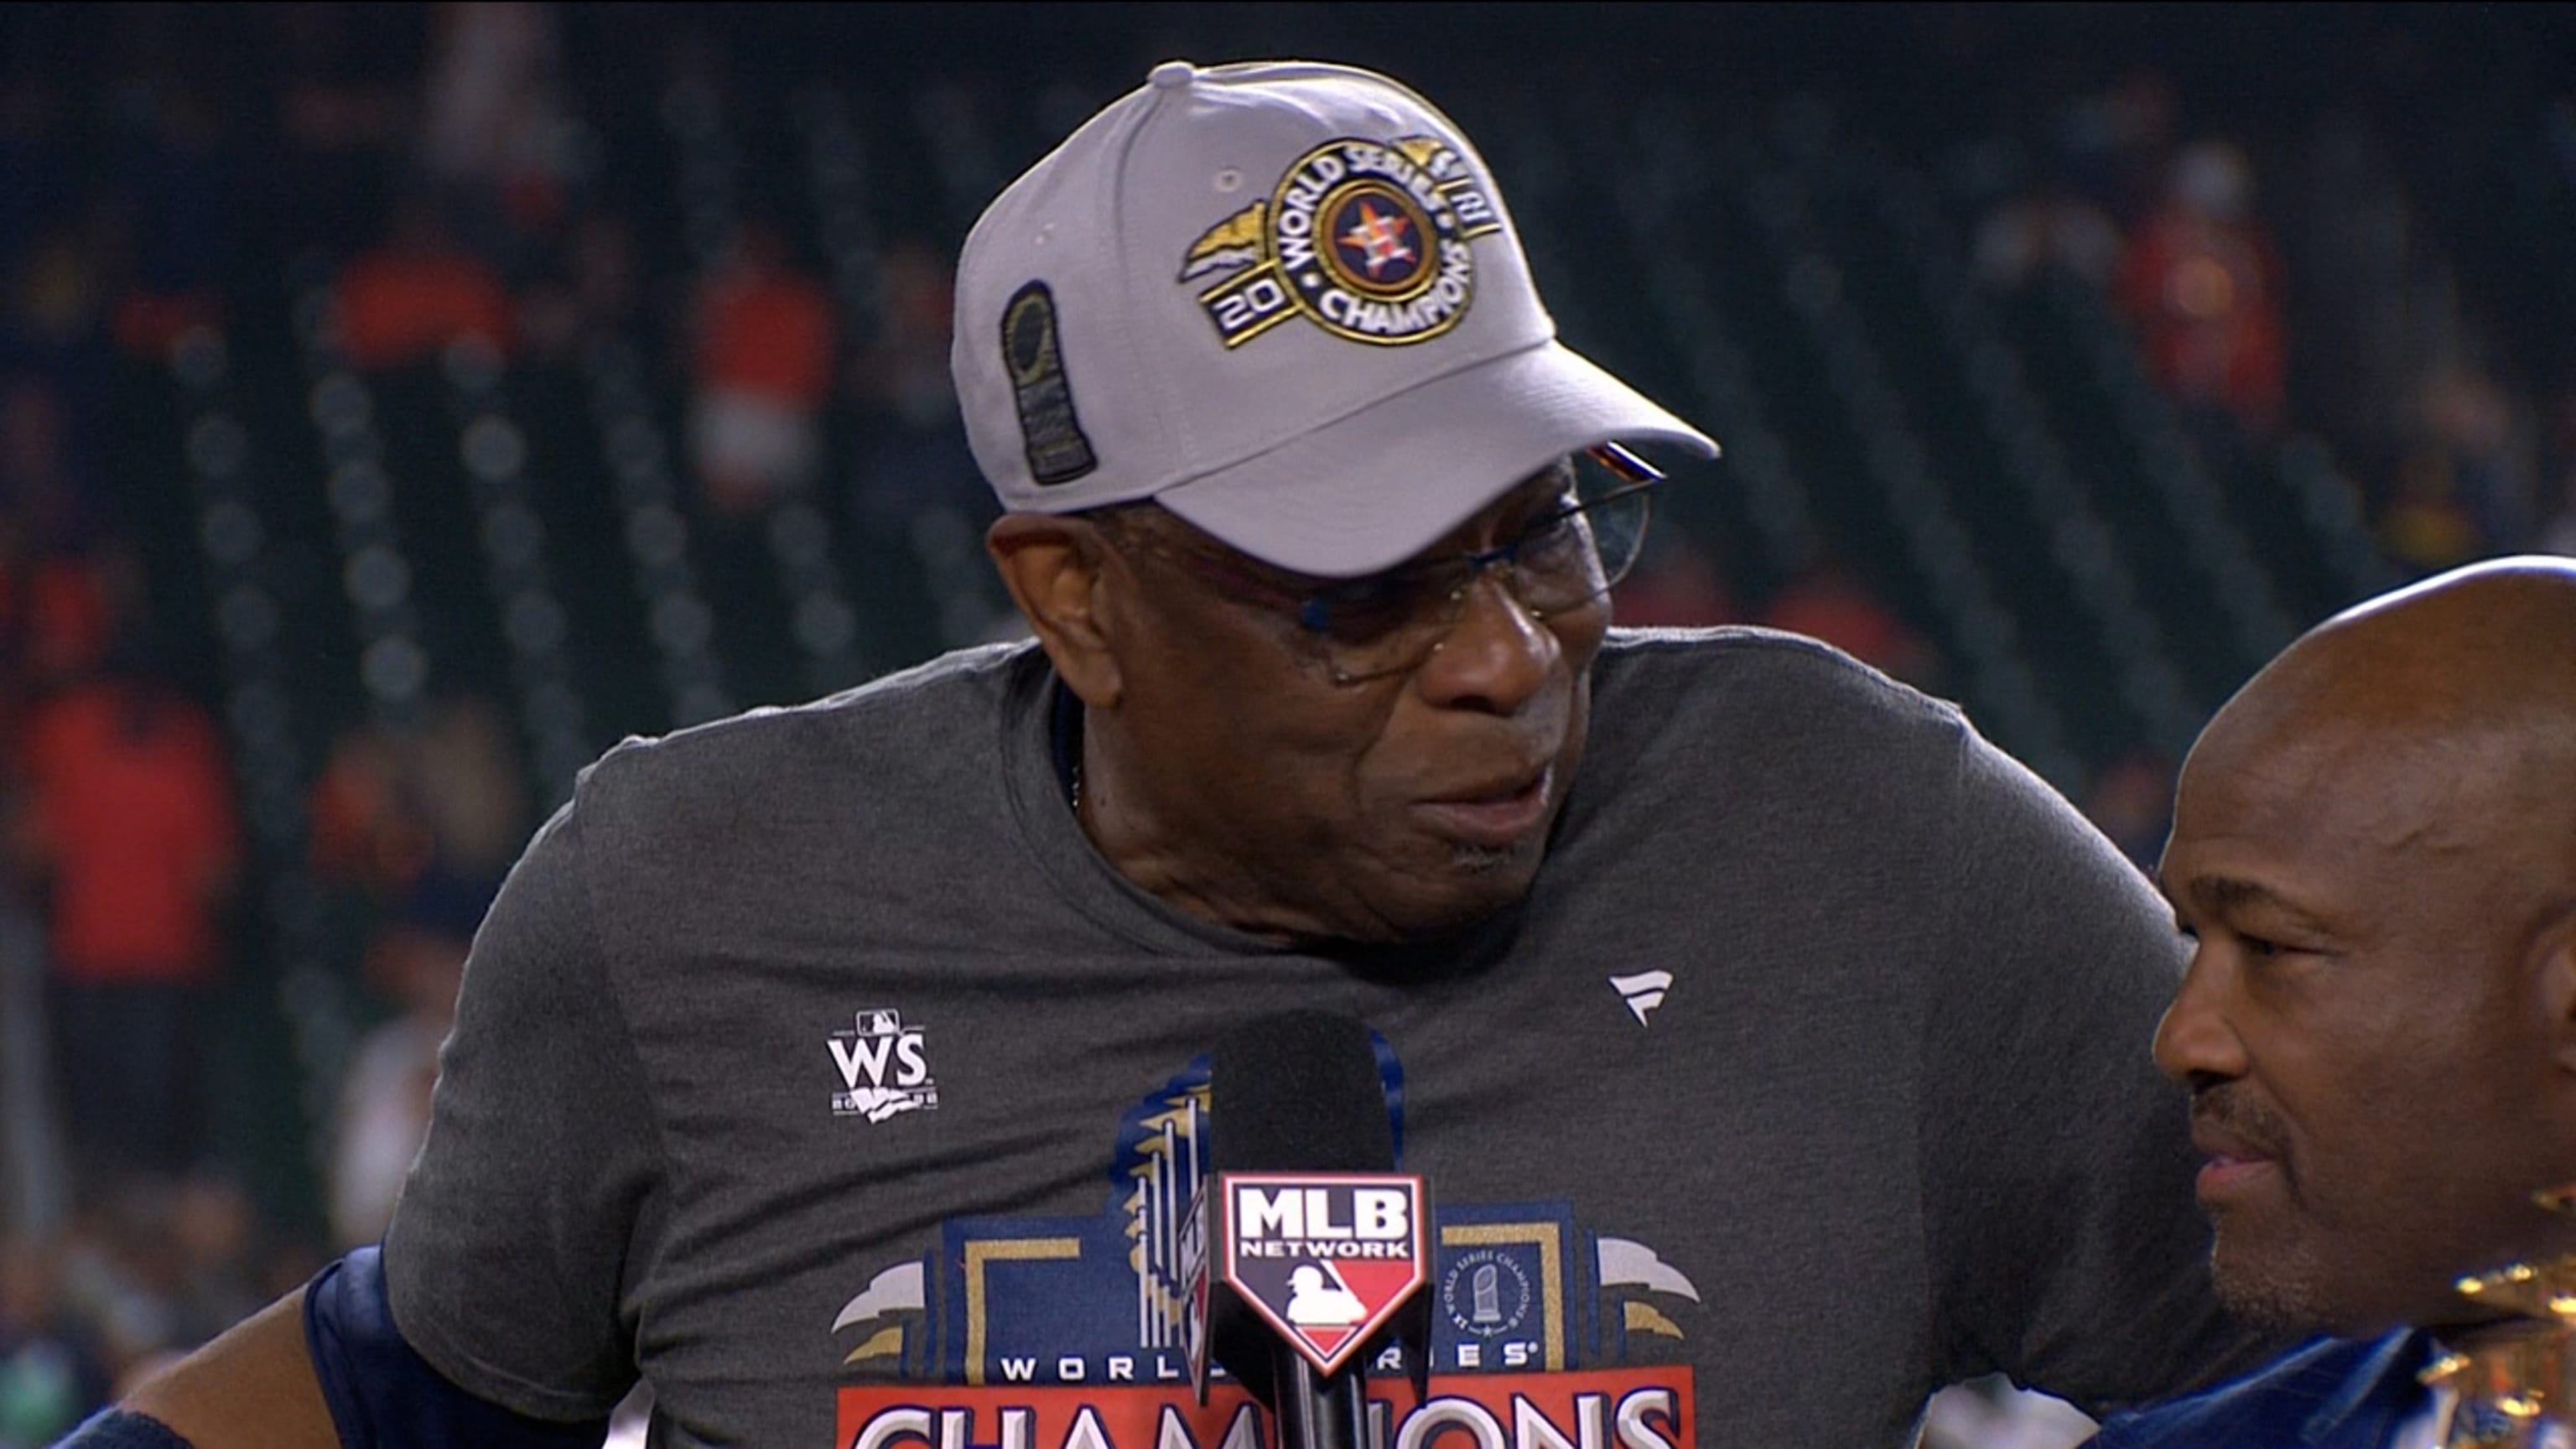 Dusty Baker's first World Series brings joy to his lifelong friends